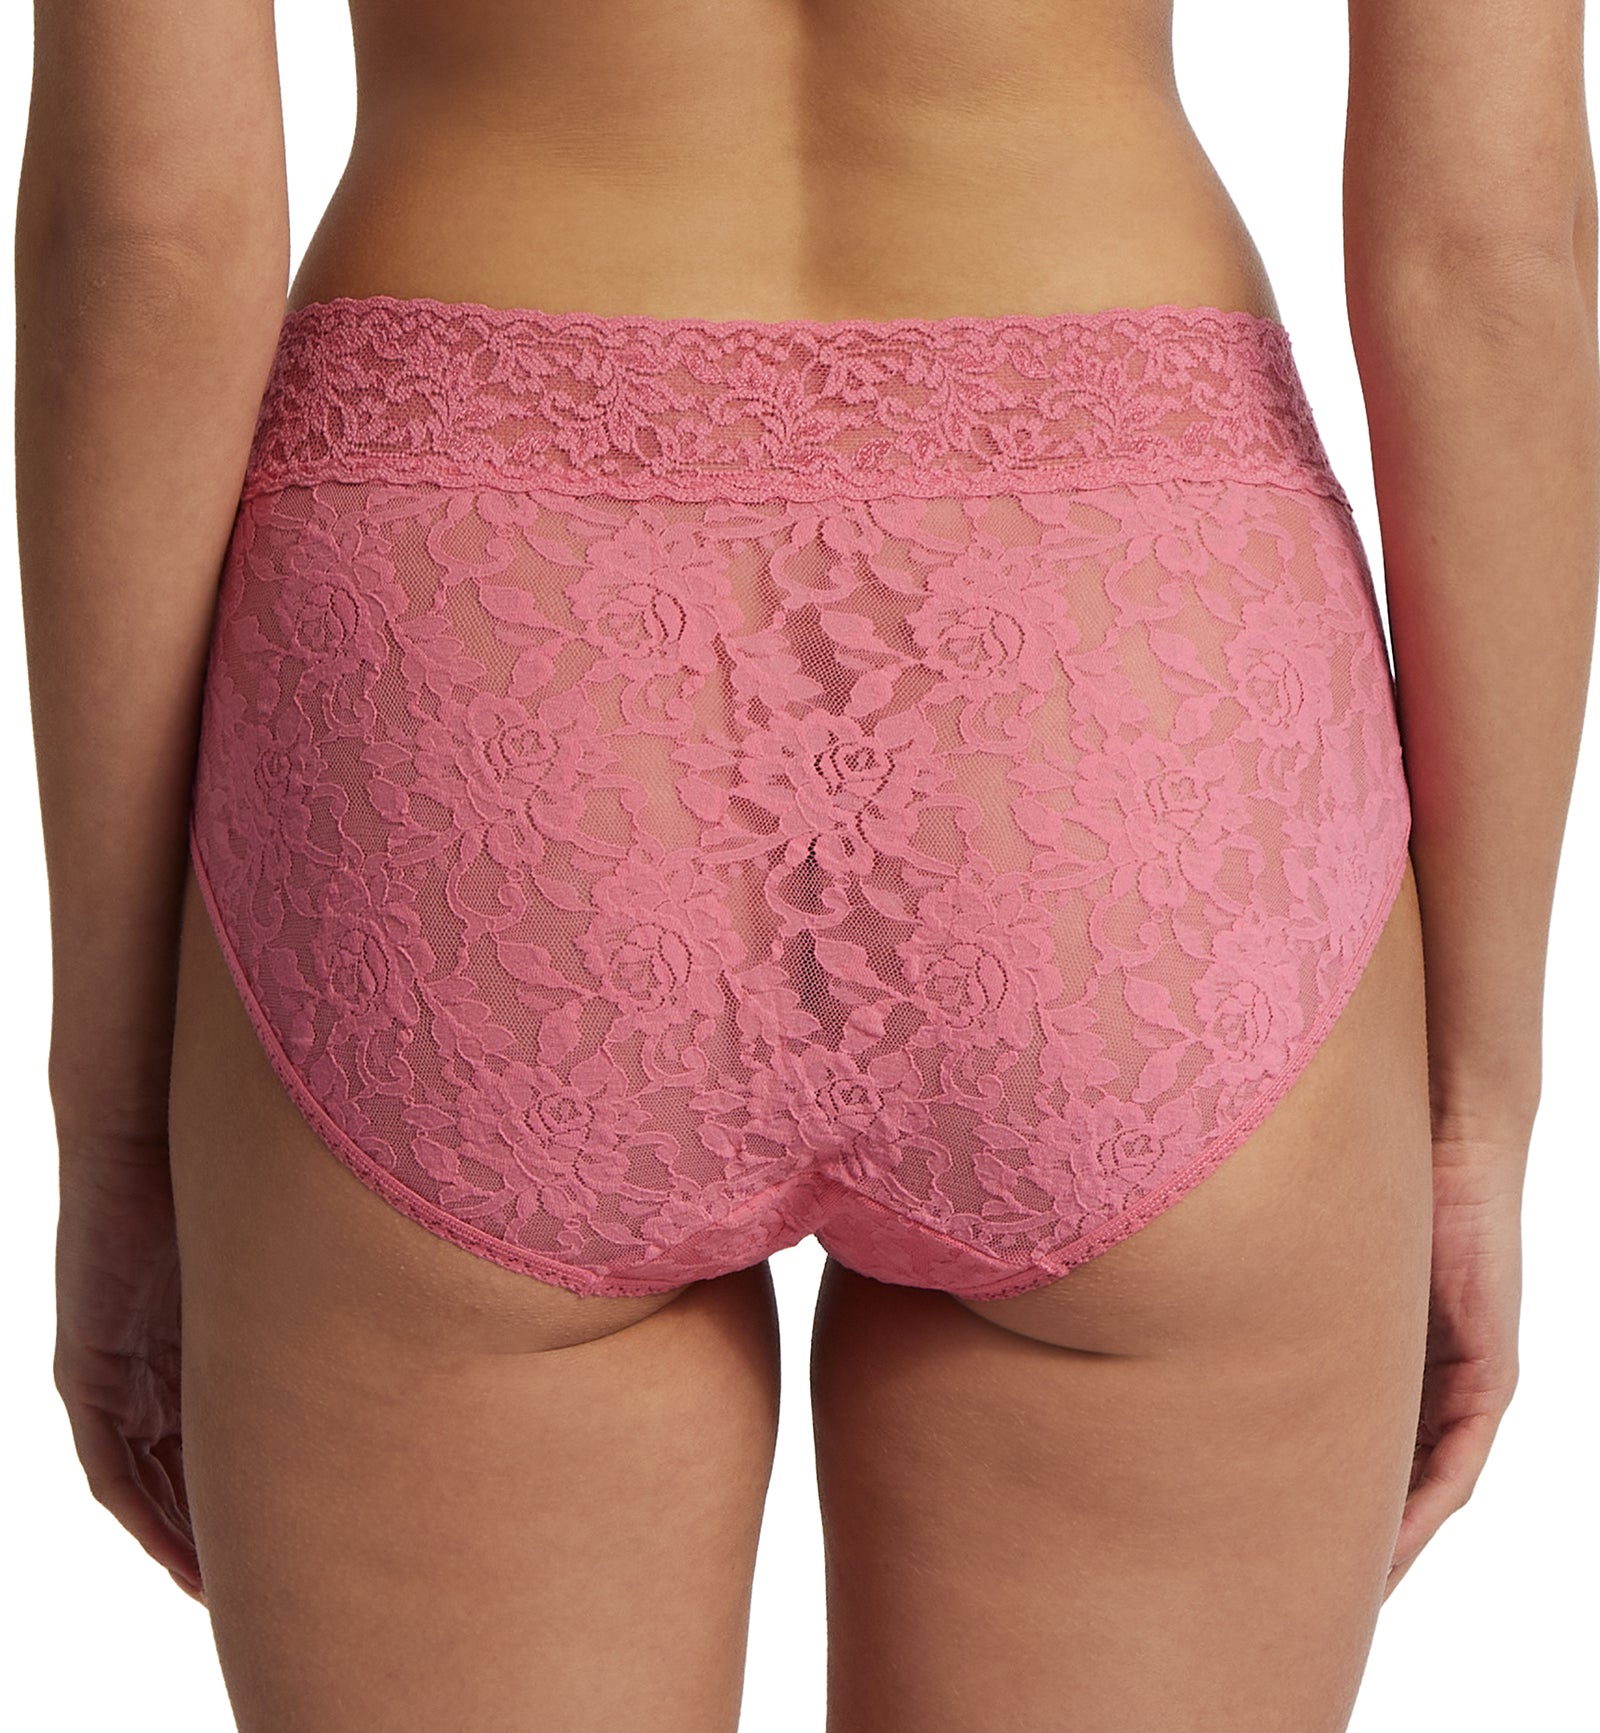 Hanky Panky Signature Lace French Brief (461),Small,Guava Pink - Guava Pink,Small